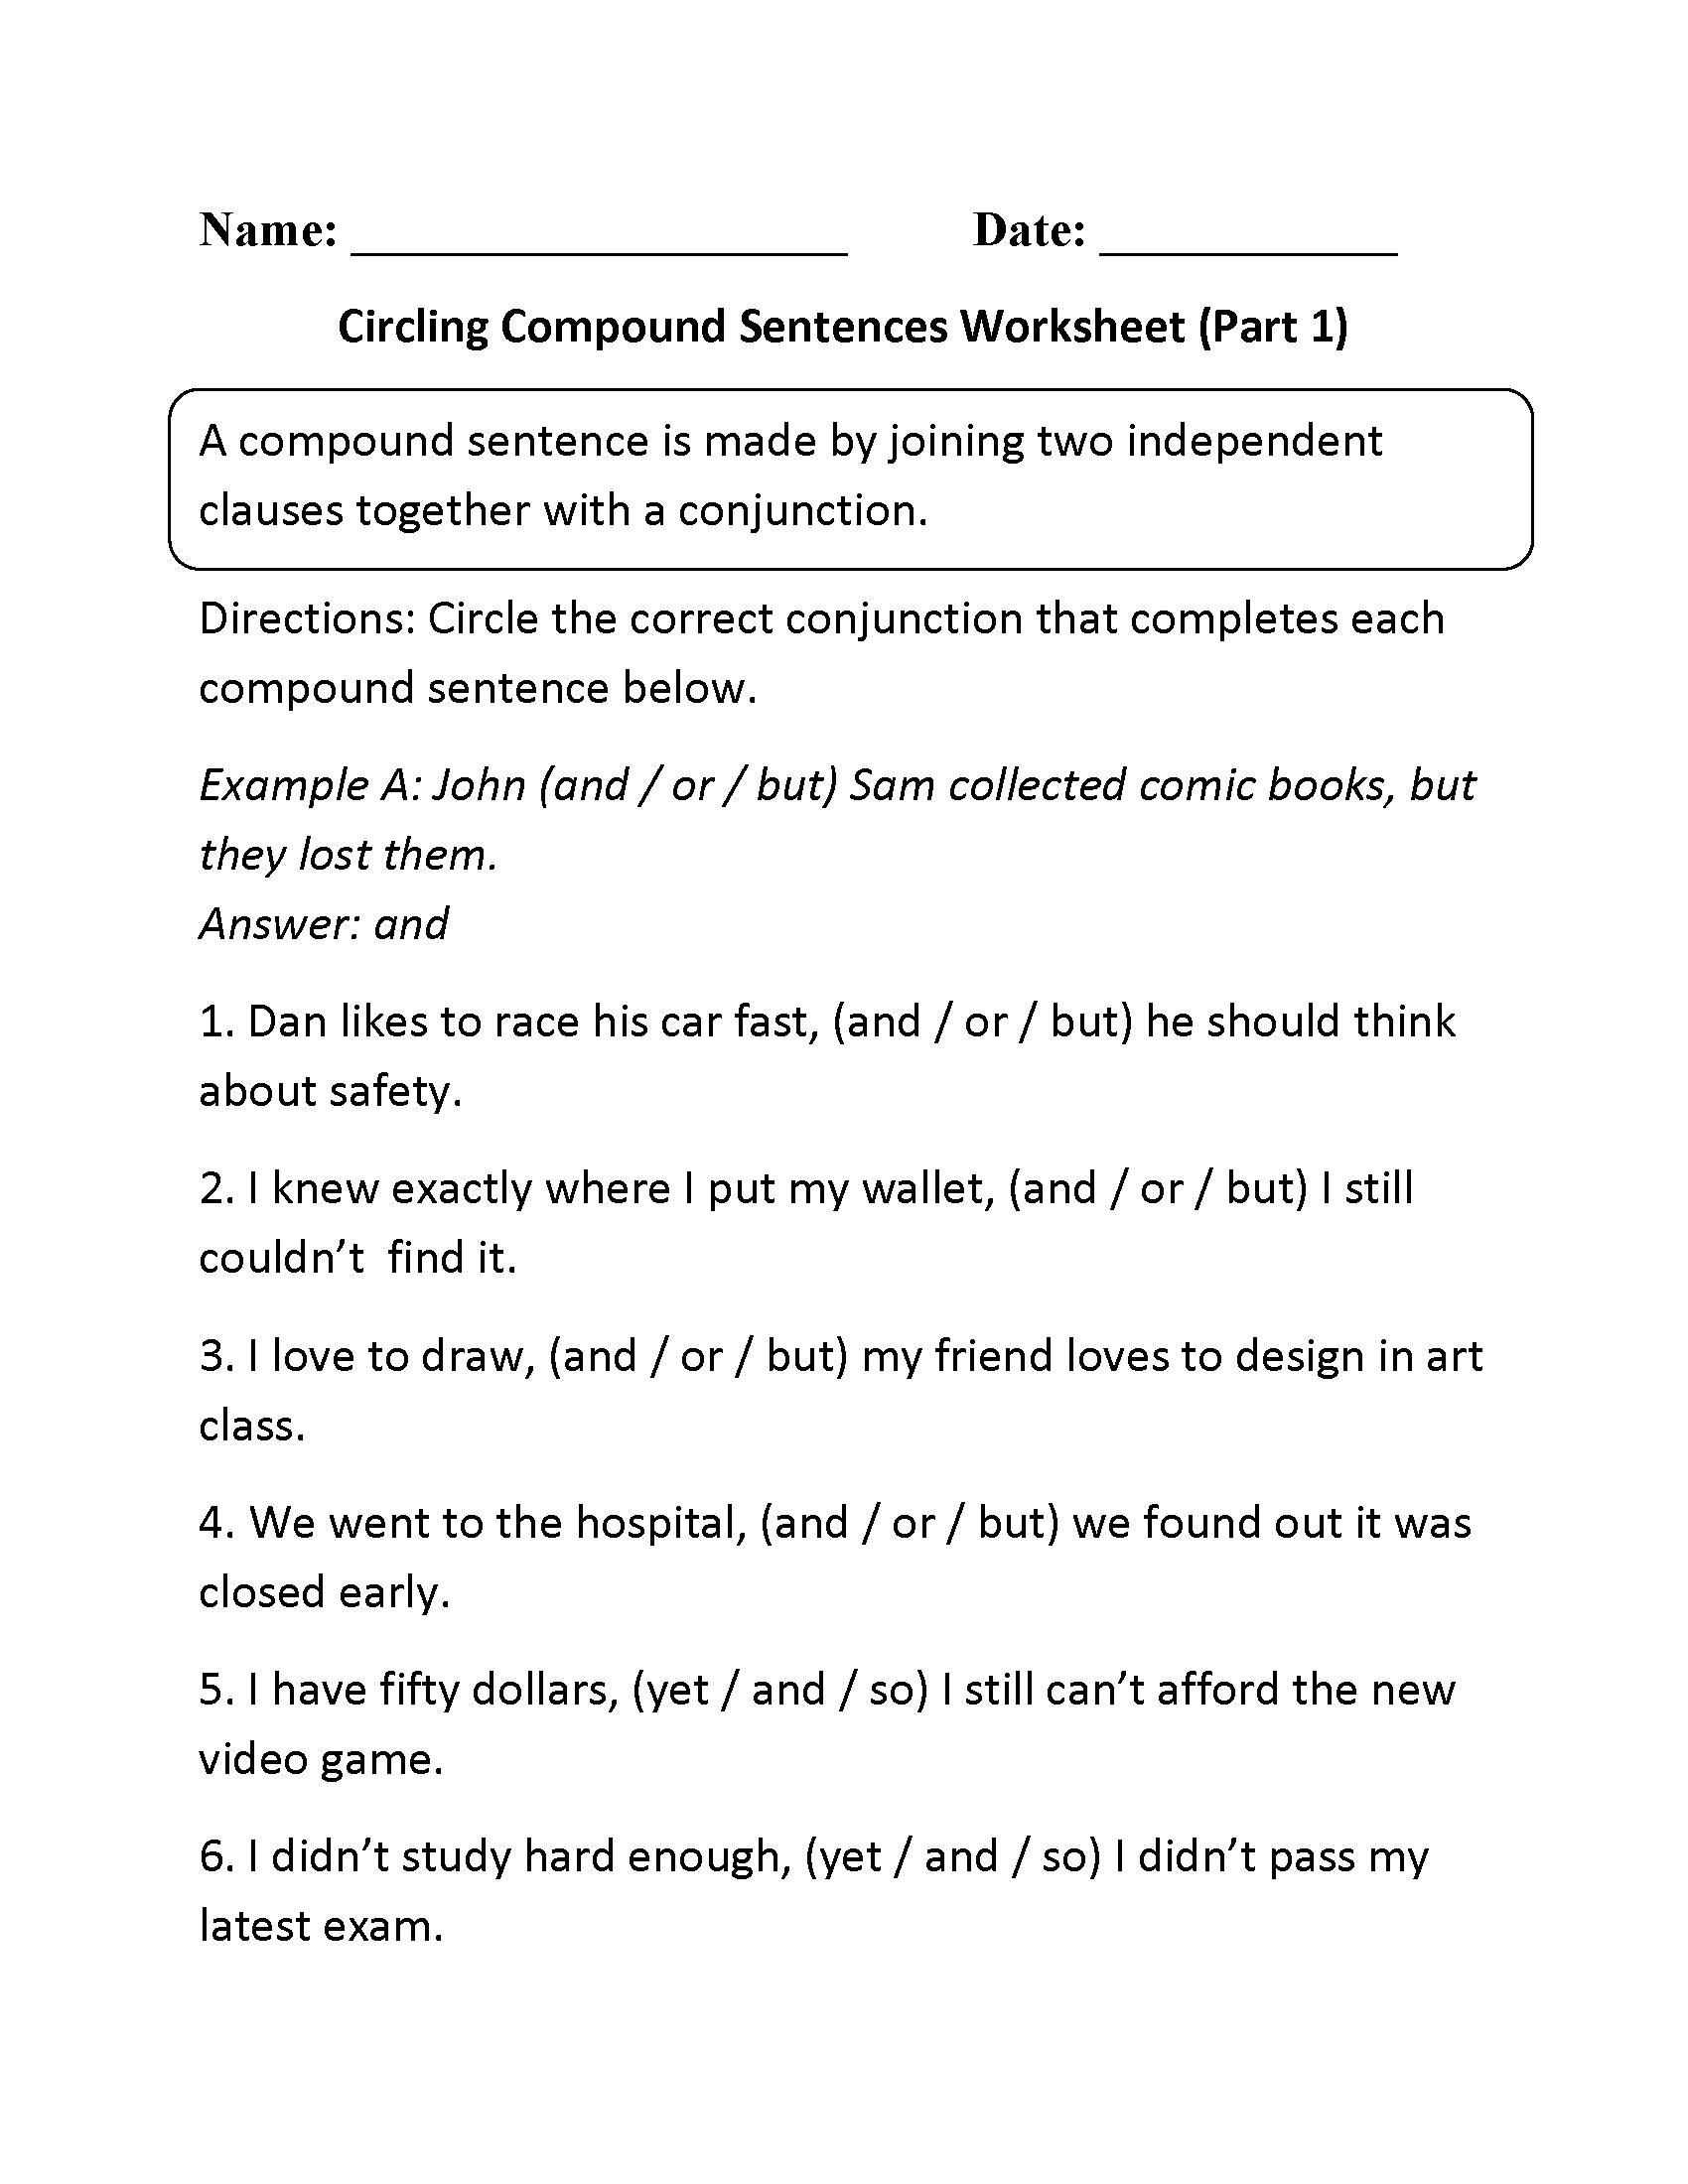 Art Worksheets for Middle School Along with English Worksheets for Middle School the Best Worksheets Image